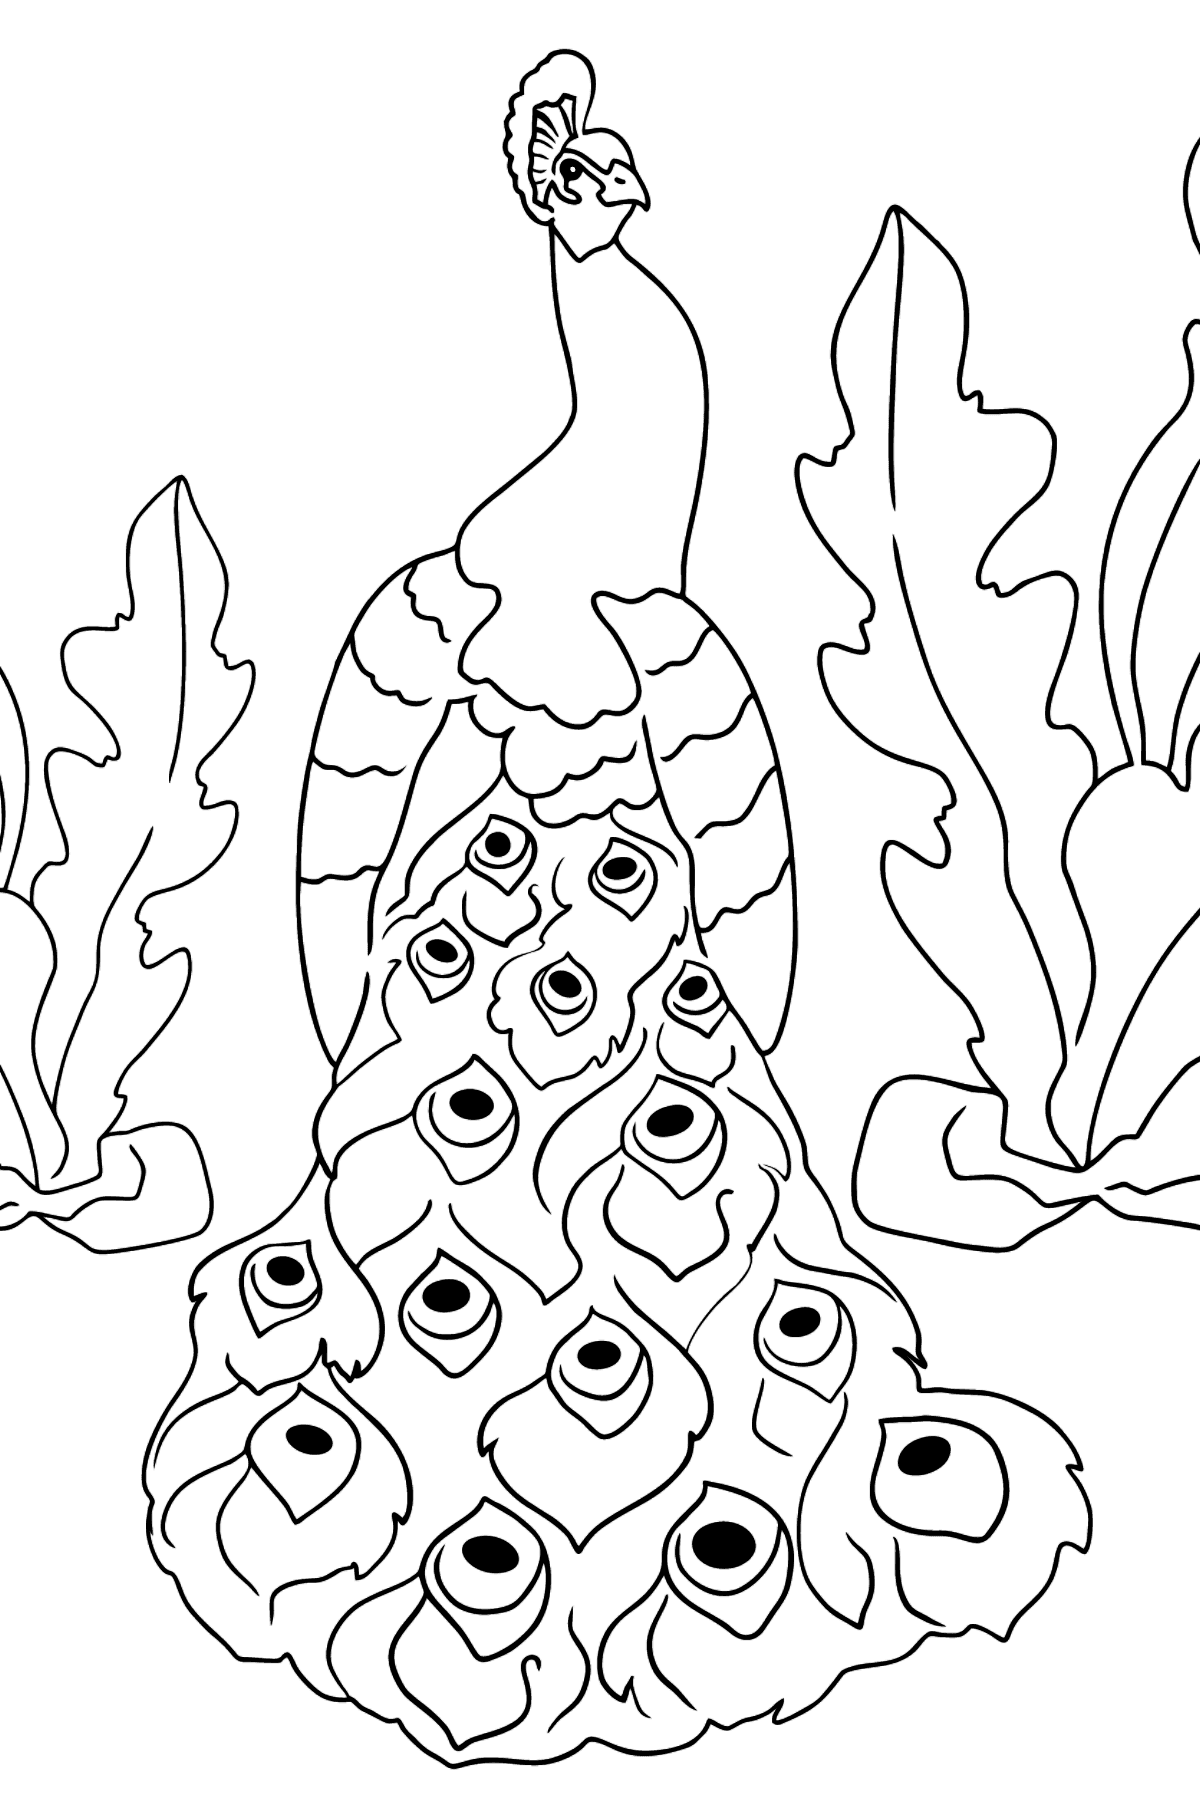 A Pompous and Haughty Peacock Coloring Page - Coloring Pages for Kids